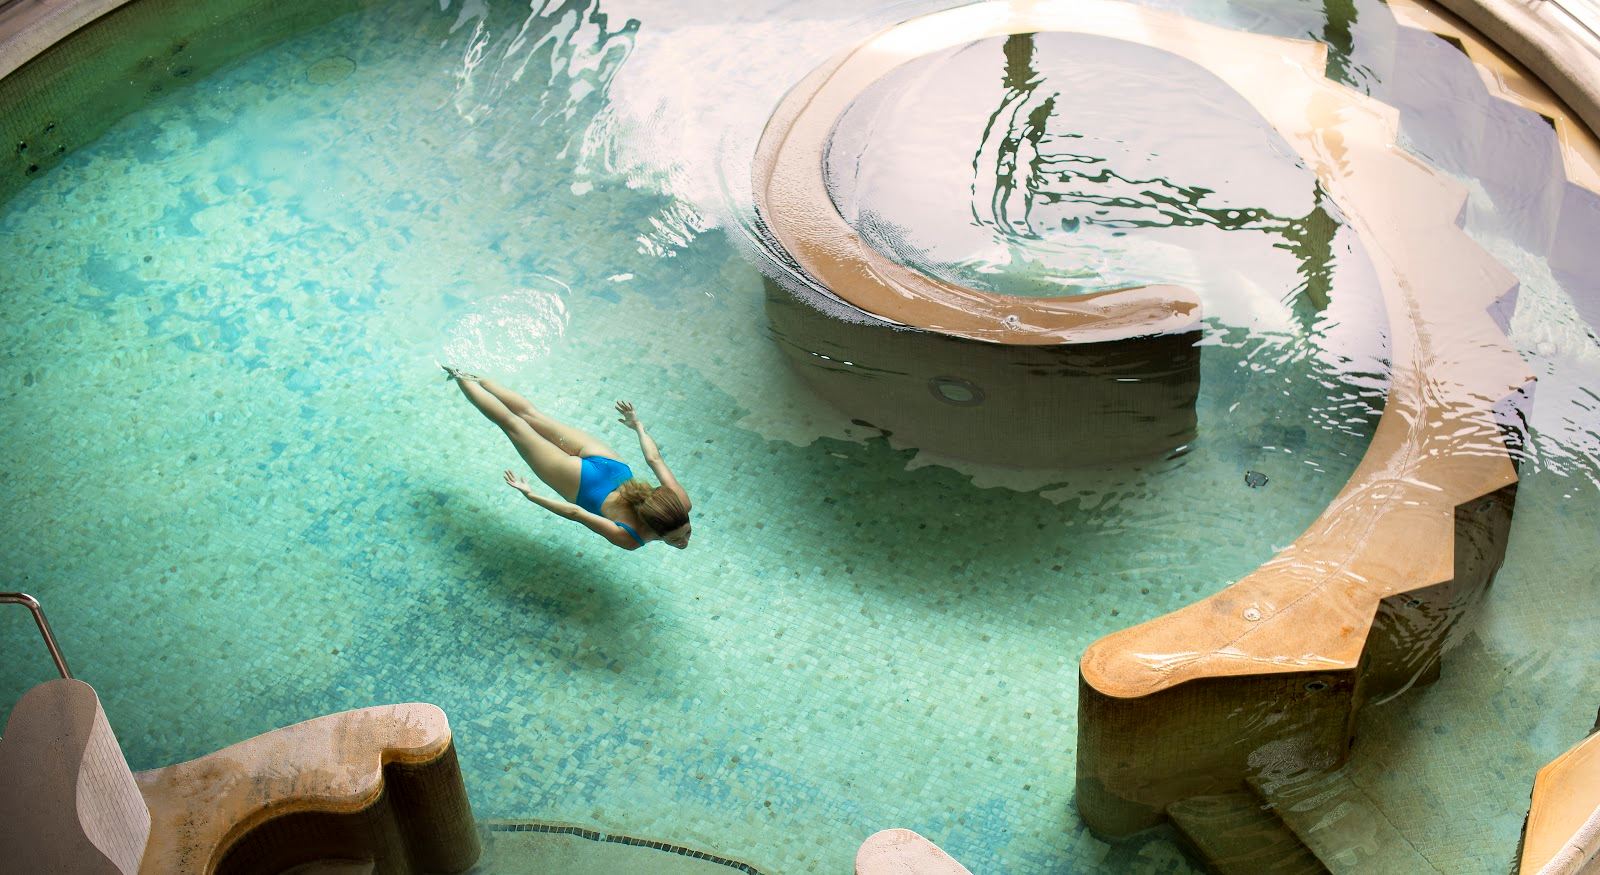 Healthy, relaxing treatments at the spas